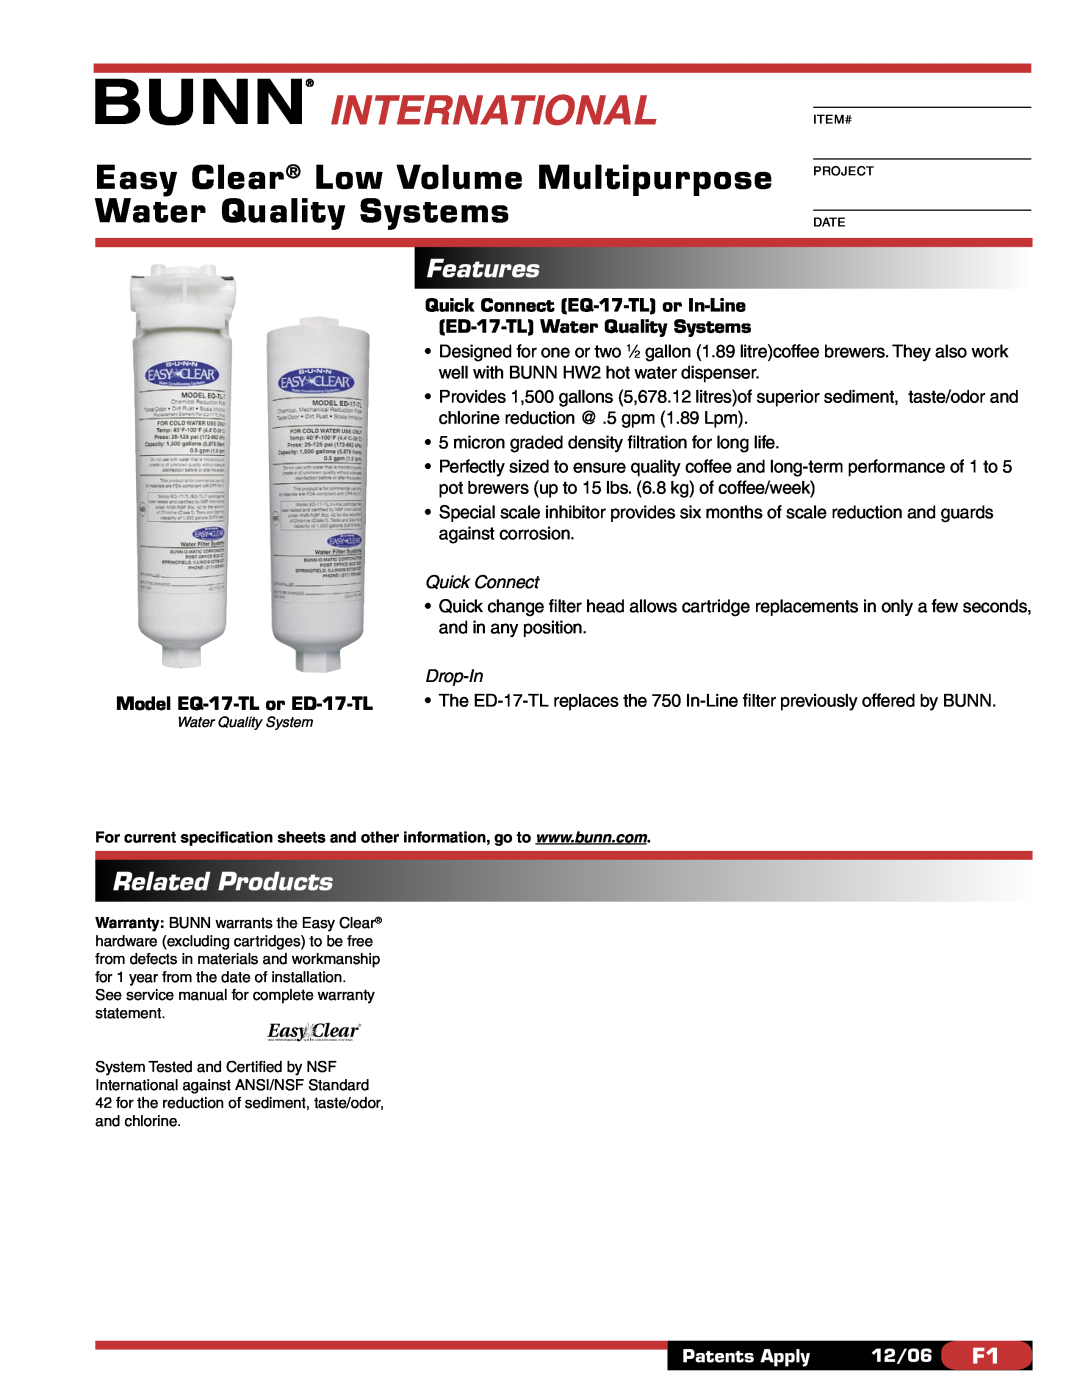 Bunn specifications Model EQ-17-TL or ED-17-TL, Quick Connect EQ-17-TL or In-Line ED-17-TL Water Quality Systems 